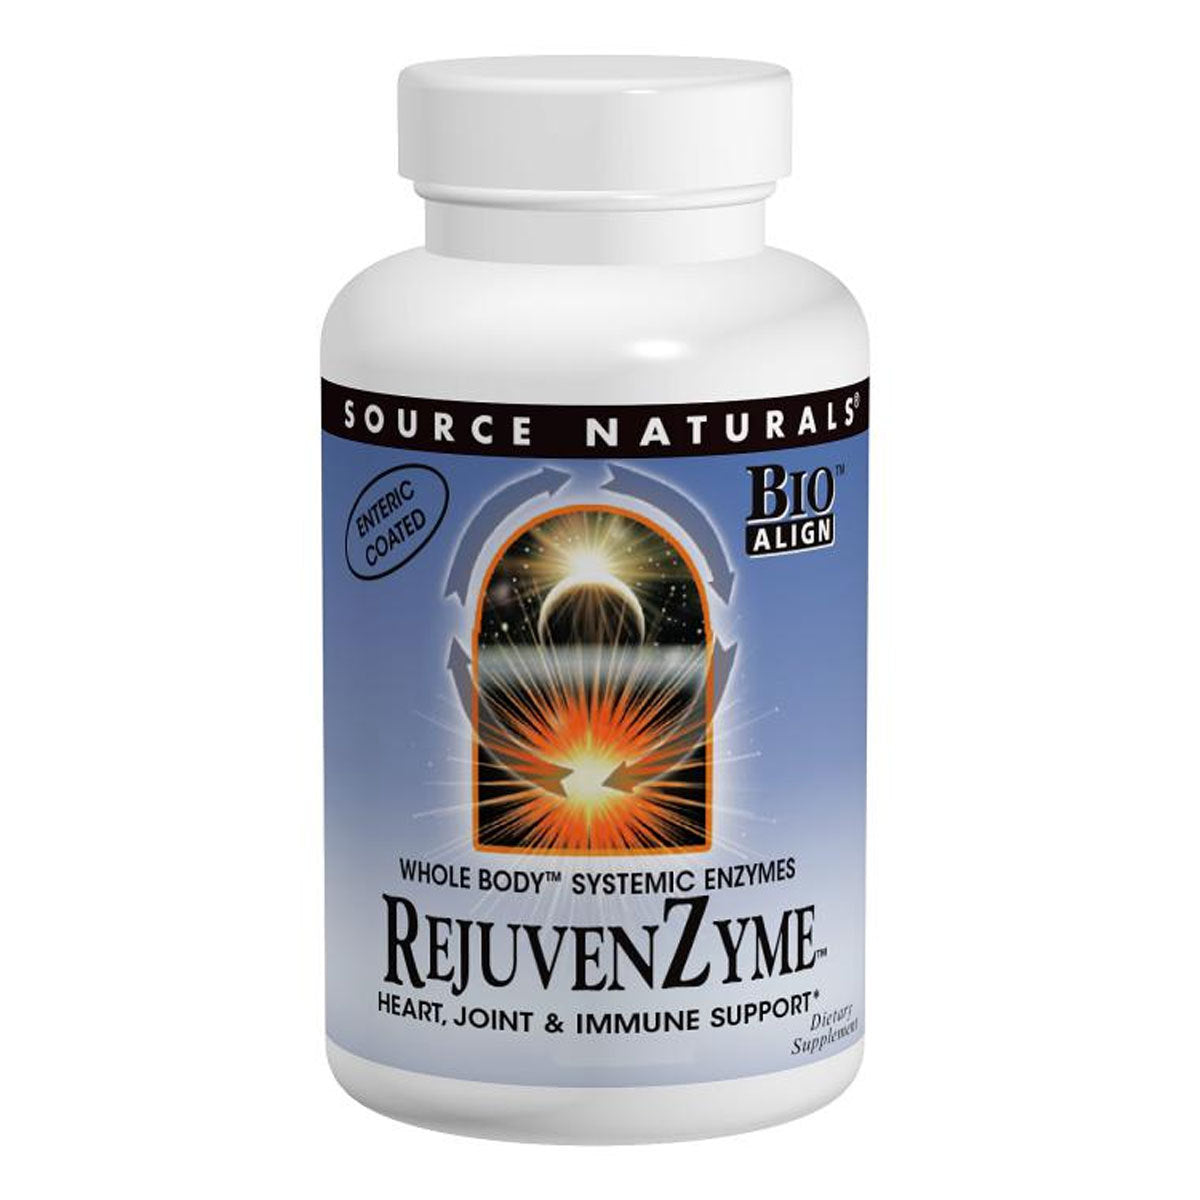 Primary image of RejuvenZyme